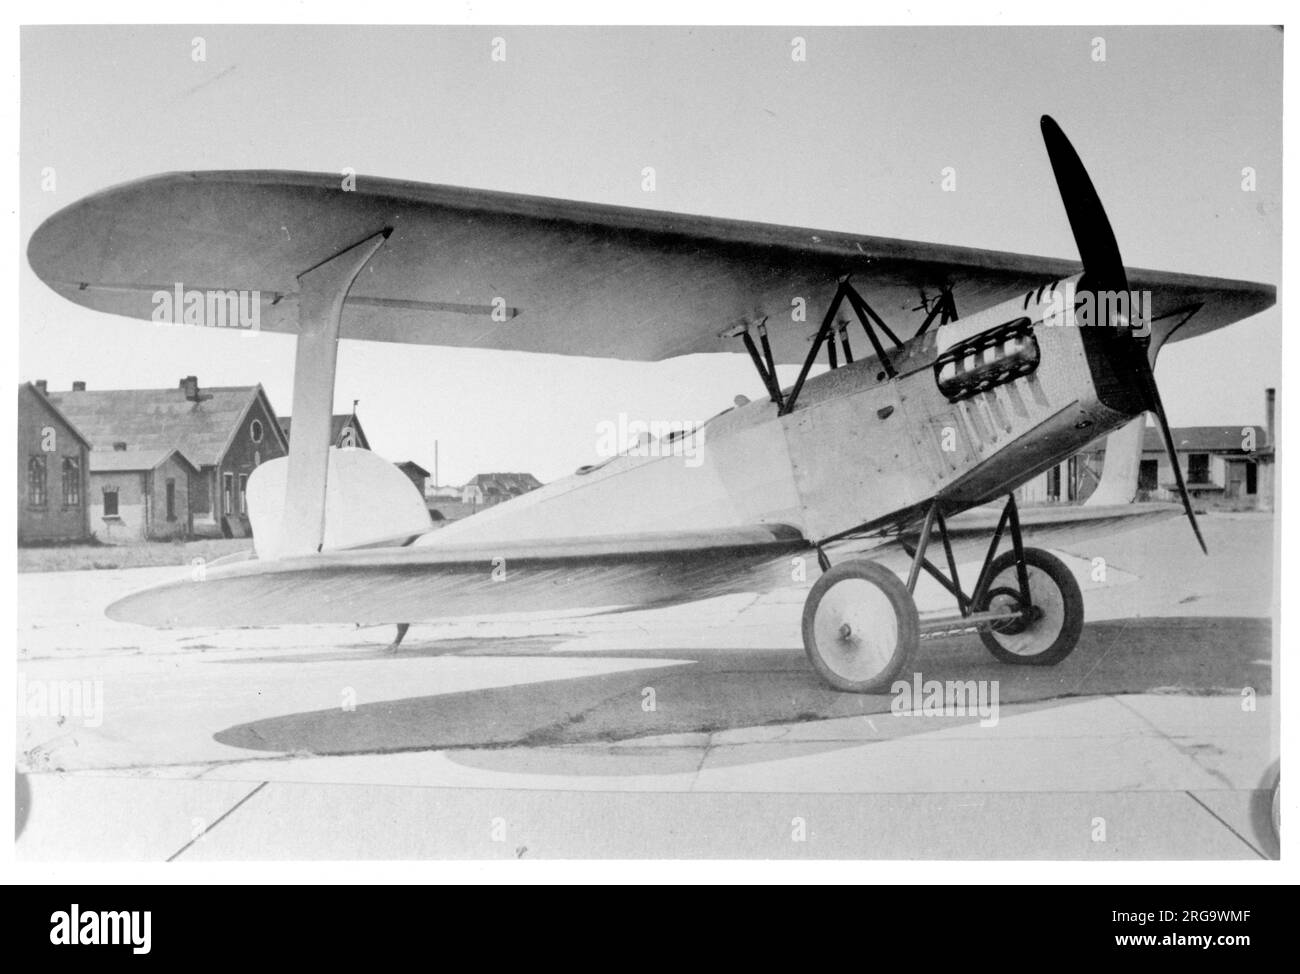 Cox-Klemin CO-1 P-377 at McCook Field for evaluation. The CO-1 and CO-2 (company designations) were licence-built Heinkel HD17 reconnaissance biplanes, powered by Napier Lion and Liberty L-12 engines respectively. The CO-1 was given the McCook Field evaluation serial P-377 and the CO-2 was serialled P-379. (Note that there is no relation to the Engineering Division CO-1 and CO-2, which were US Army designations in the Corps Observation category). Stock Photo